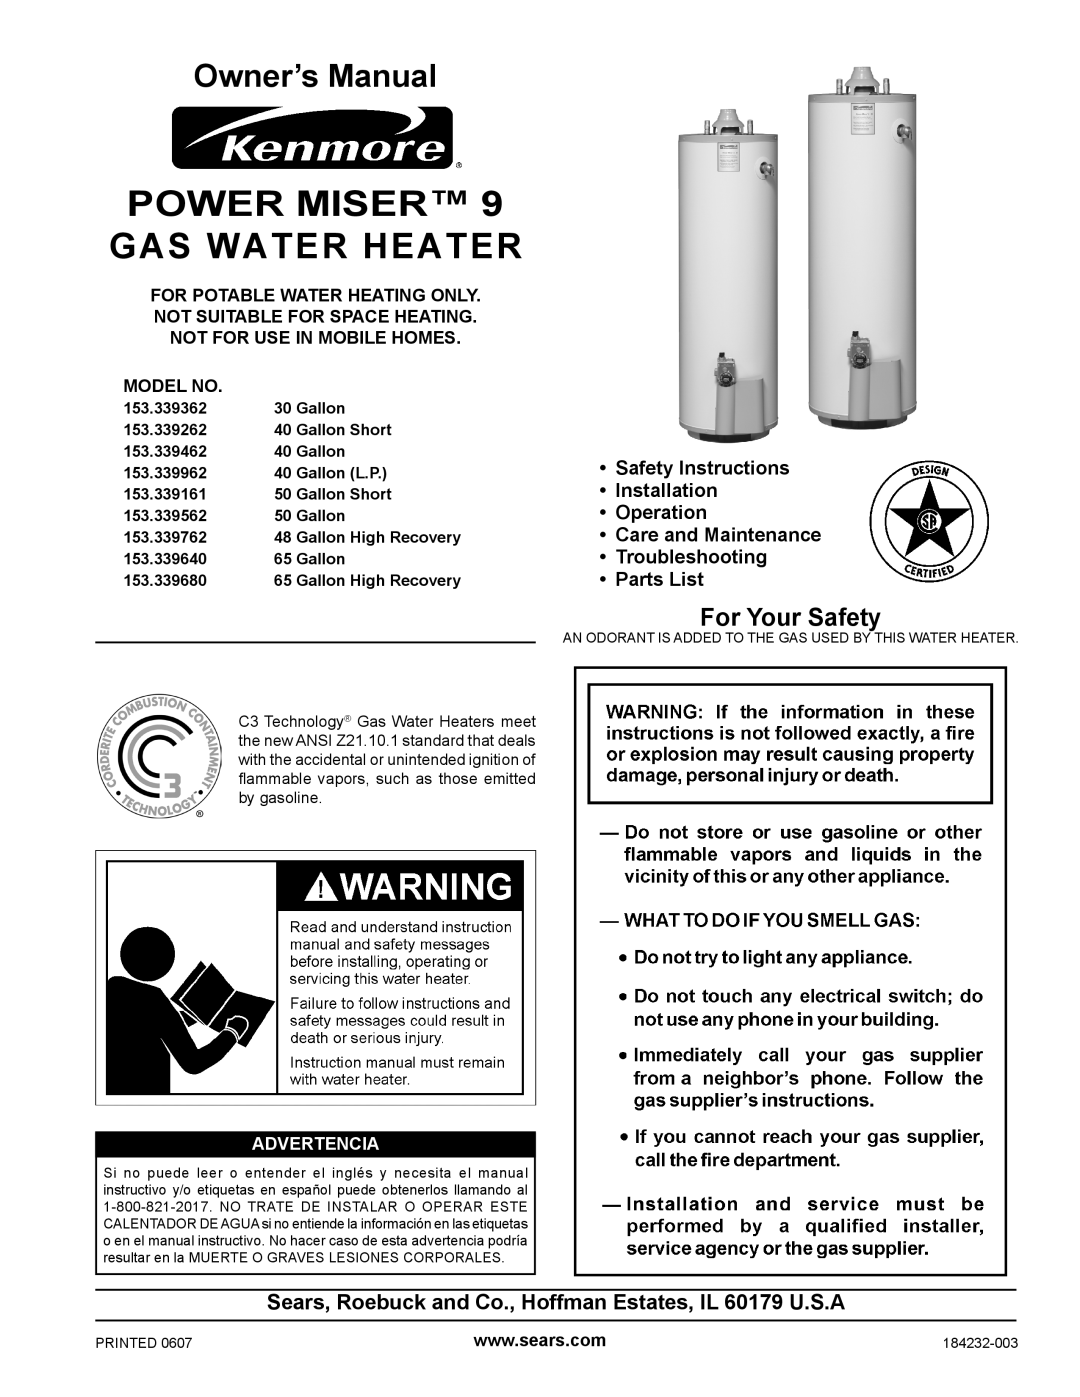 Kenmore 153.339562 owner manual For Your Safety, POWER MISER 9 GAS WATER HEATER, Care and Maintenance Troubleshooting 